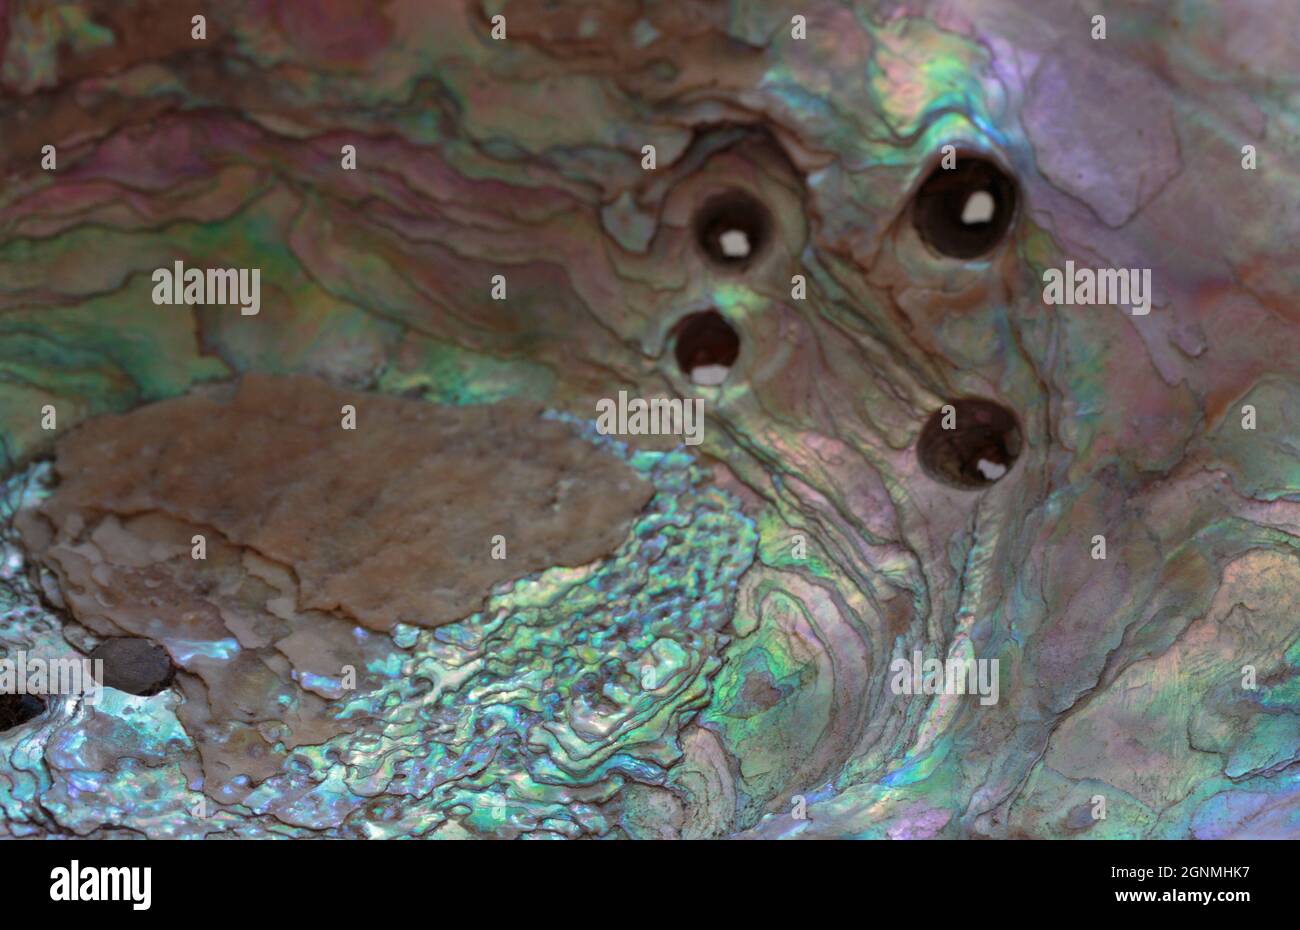 close up macro shot of a nacre or mother of pearl lining of a mollusk shell in iridescent shades of turquoise, sea foam green and lavender, artistic b Stock Photo